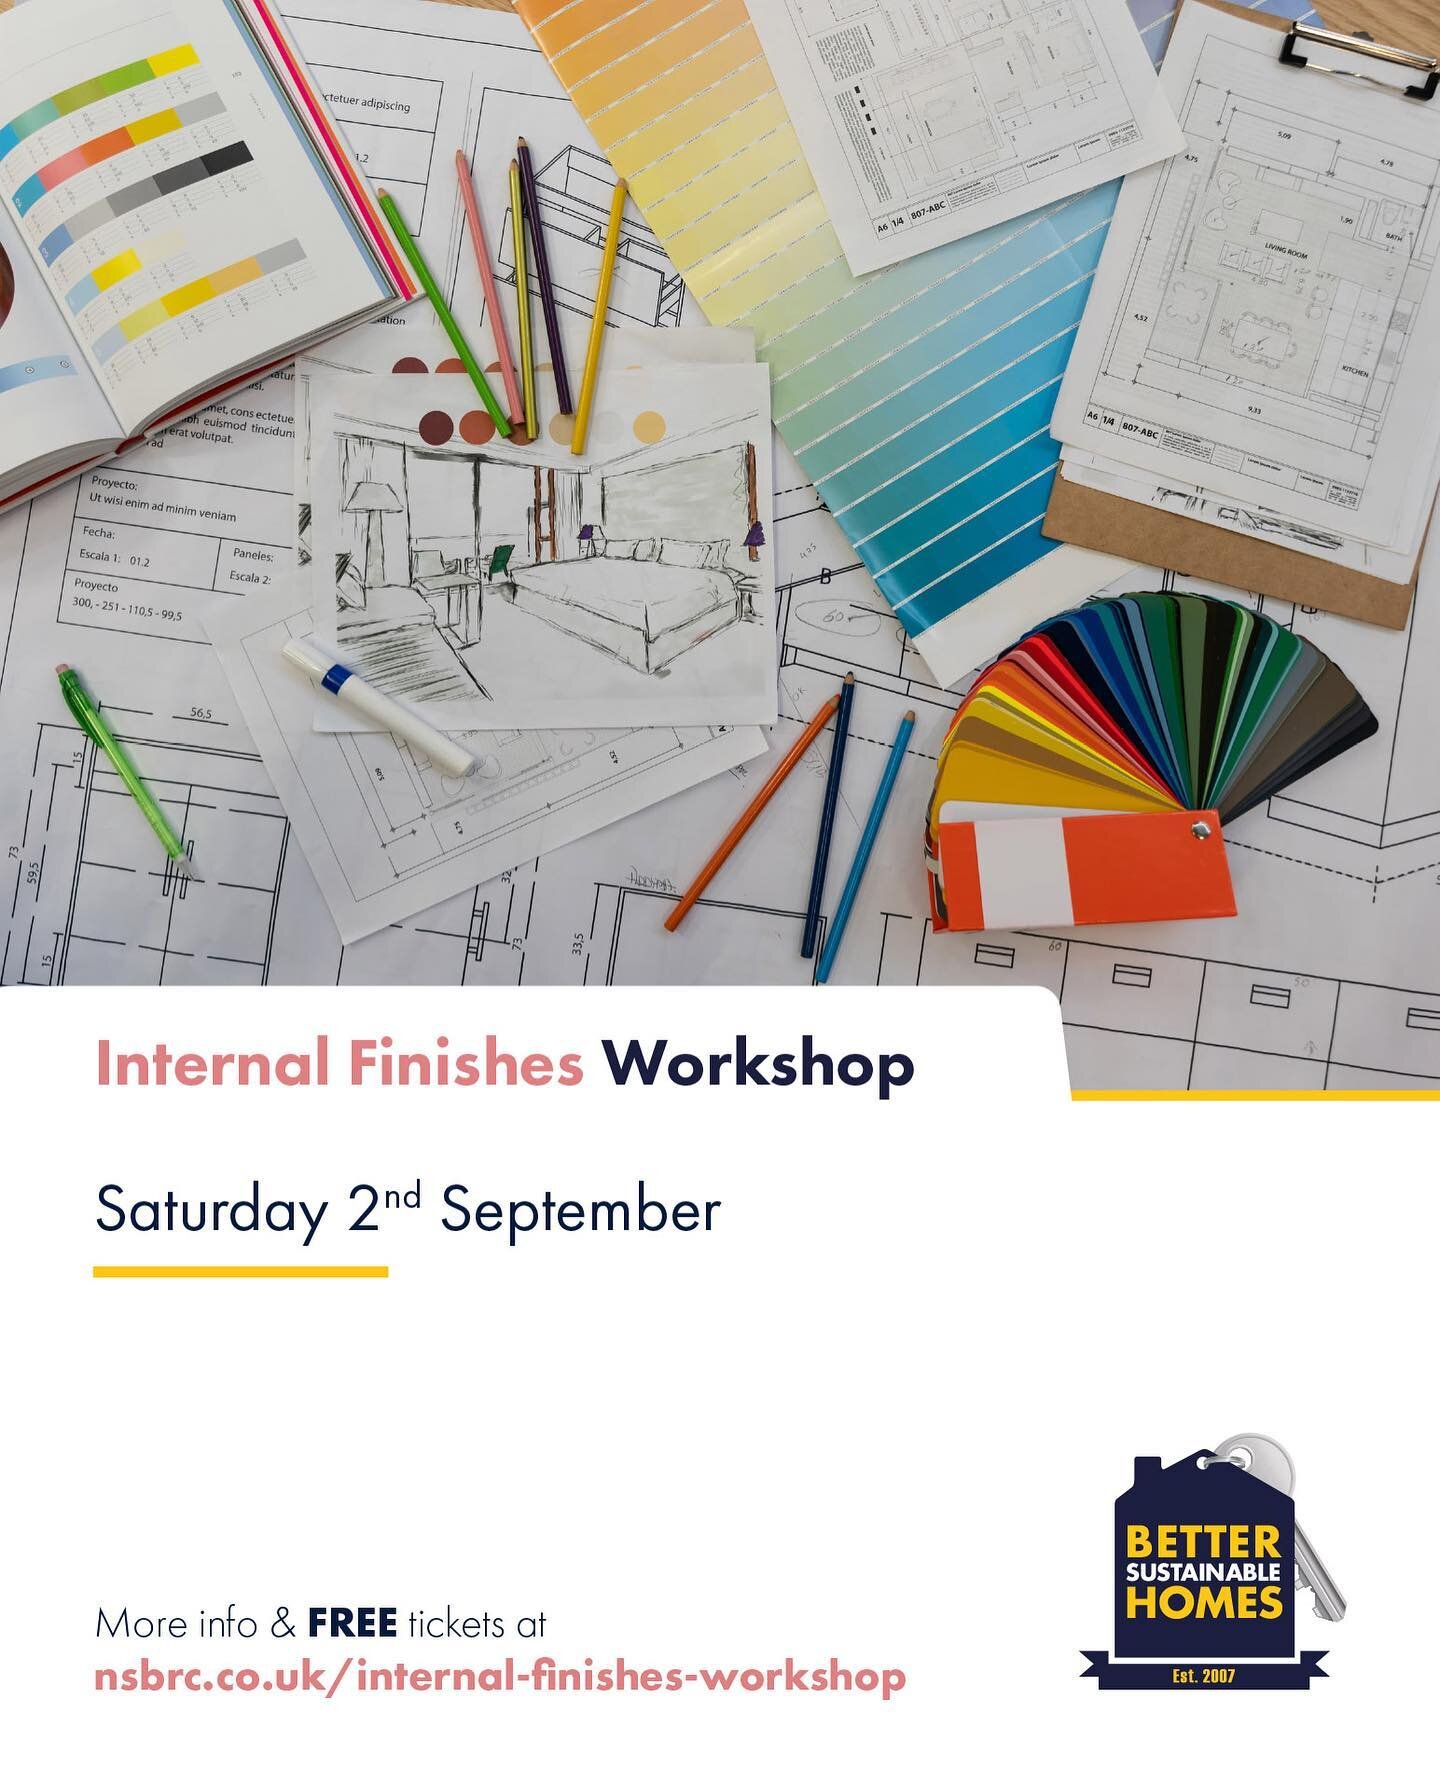 If you&rsquo;re building, thinking of building or about to renovate your home, these workshops at the National Self Build and Renovation Centre are really worthwhile. You will find almost everything you could possibly need in the way of resources and